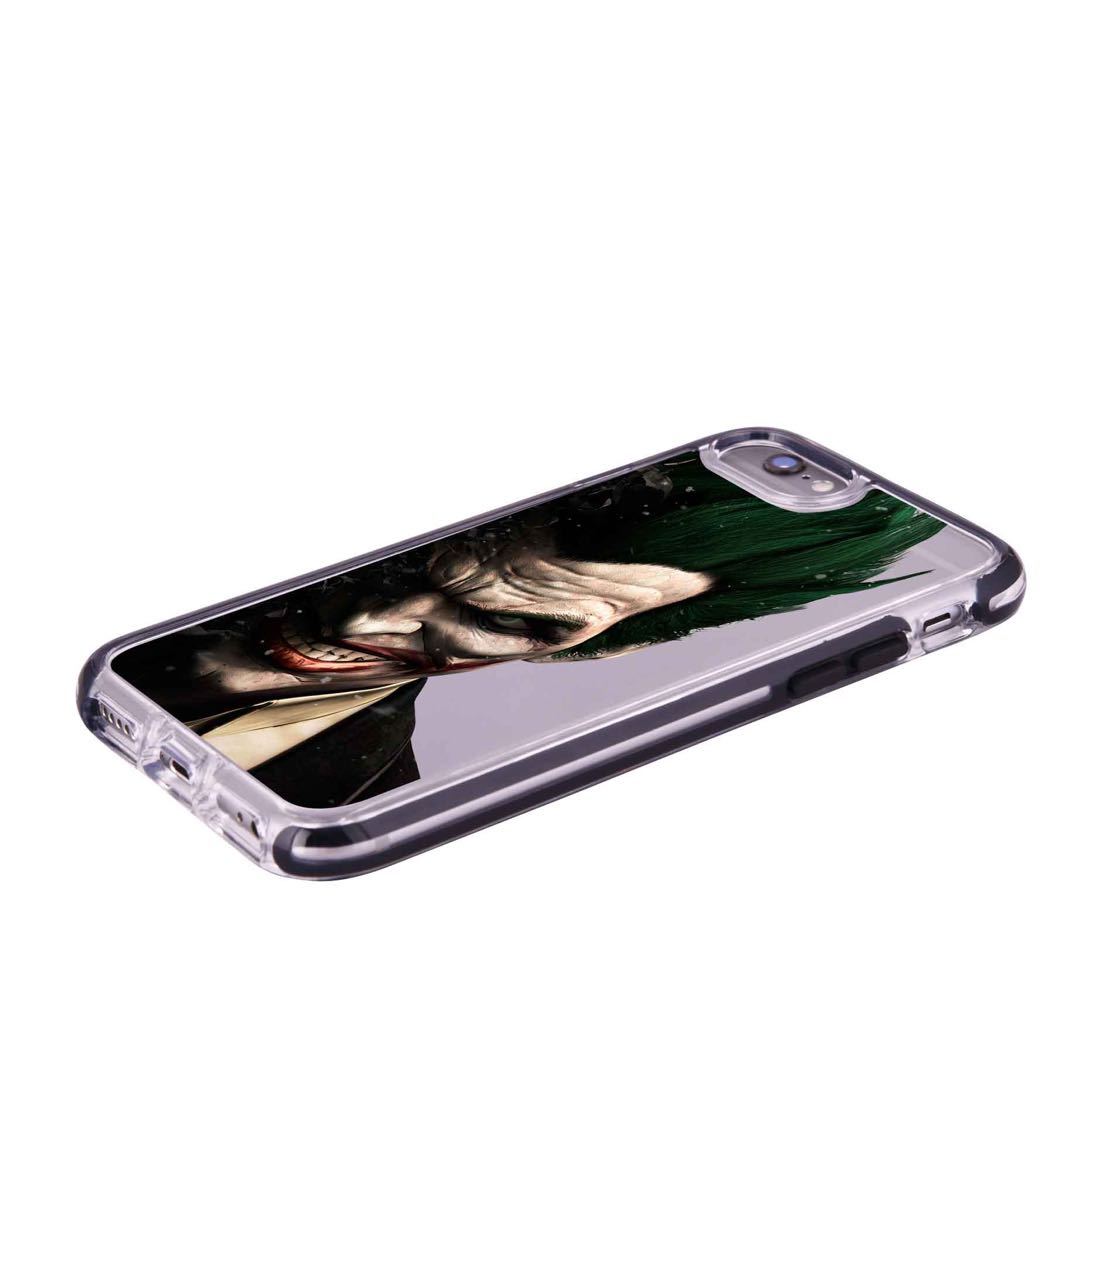 Joker Withers - Extreme Phone Case for iPhone 6S